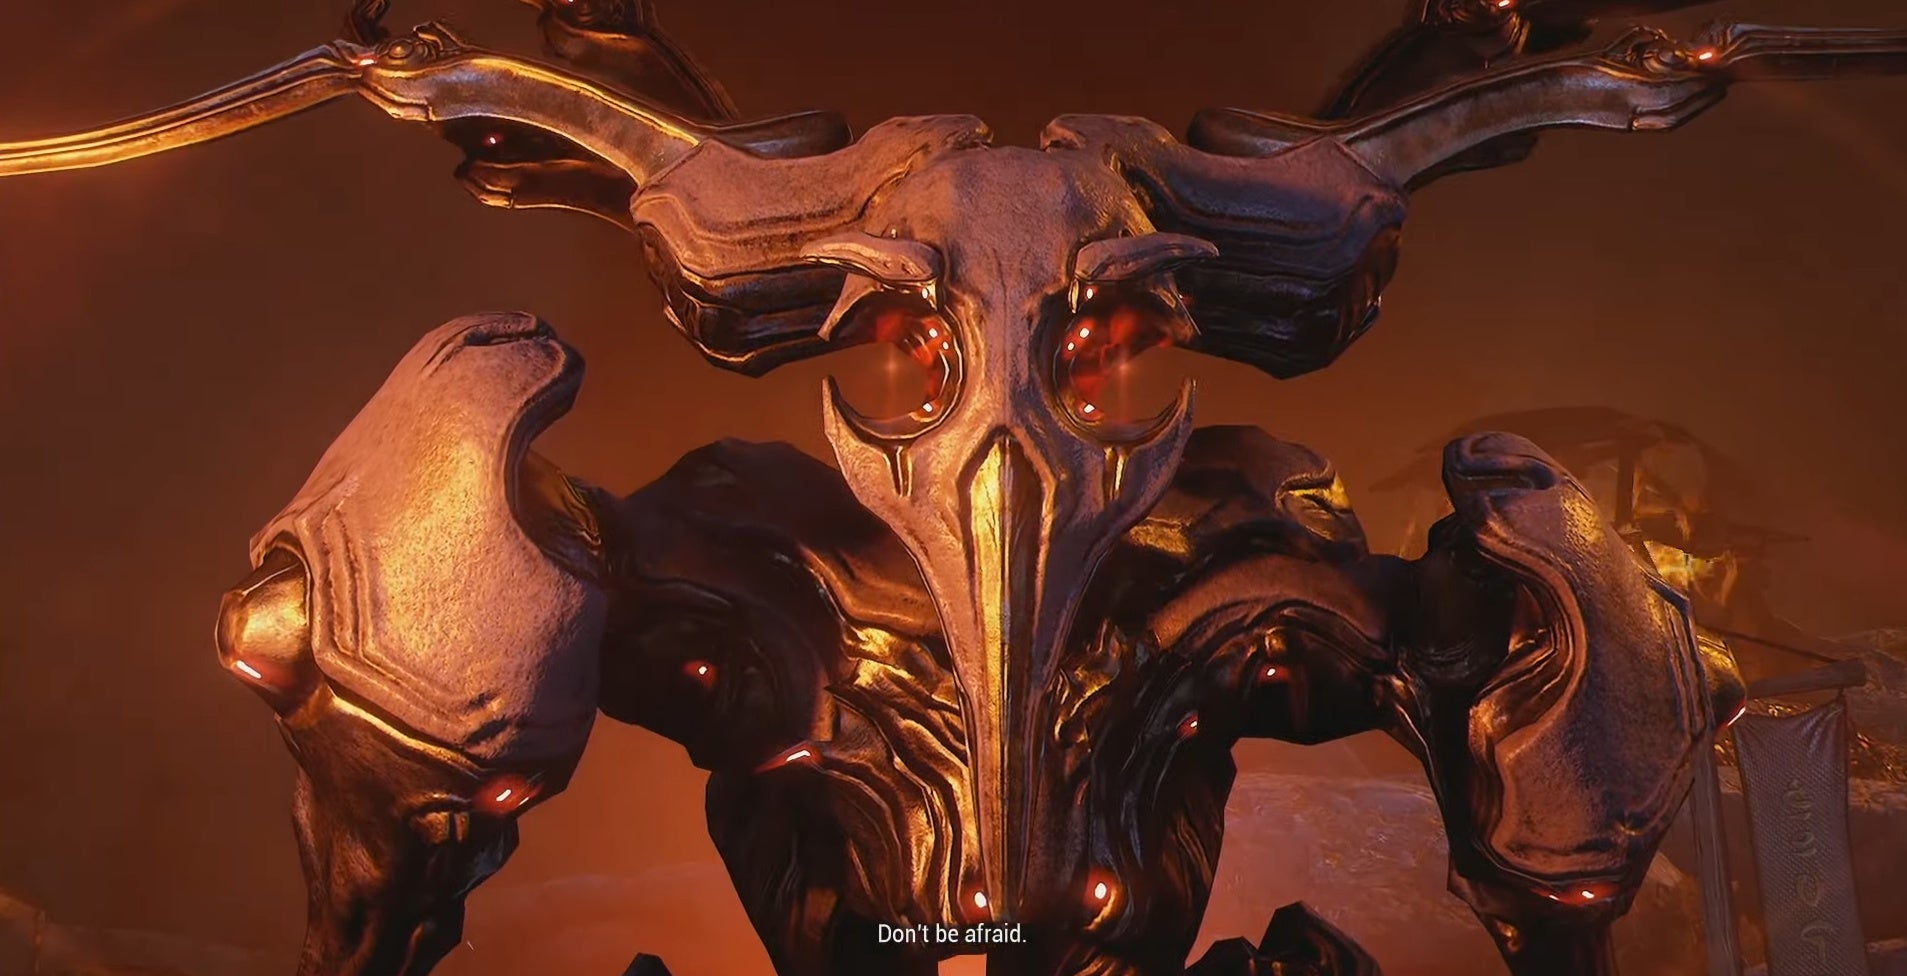 A screenshot of Warframe showing a terrible giant. The subtitle reads, "Don't be afraid."